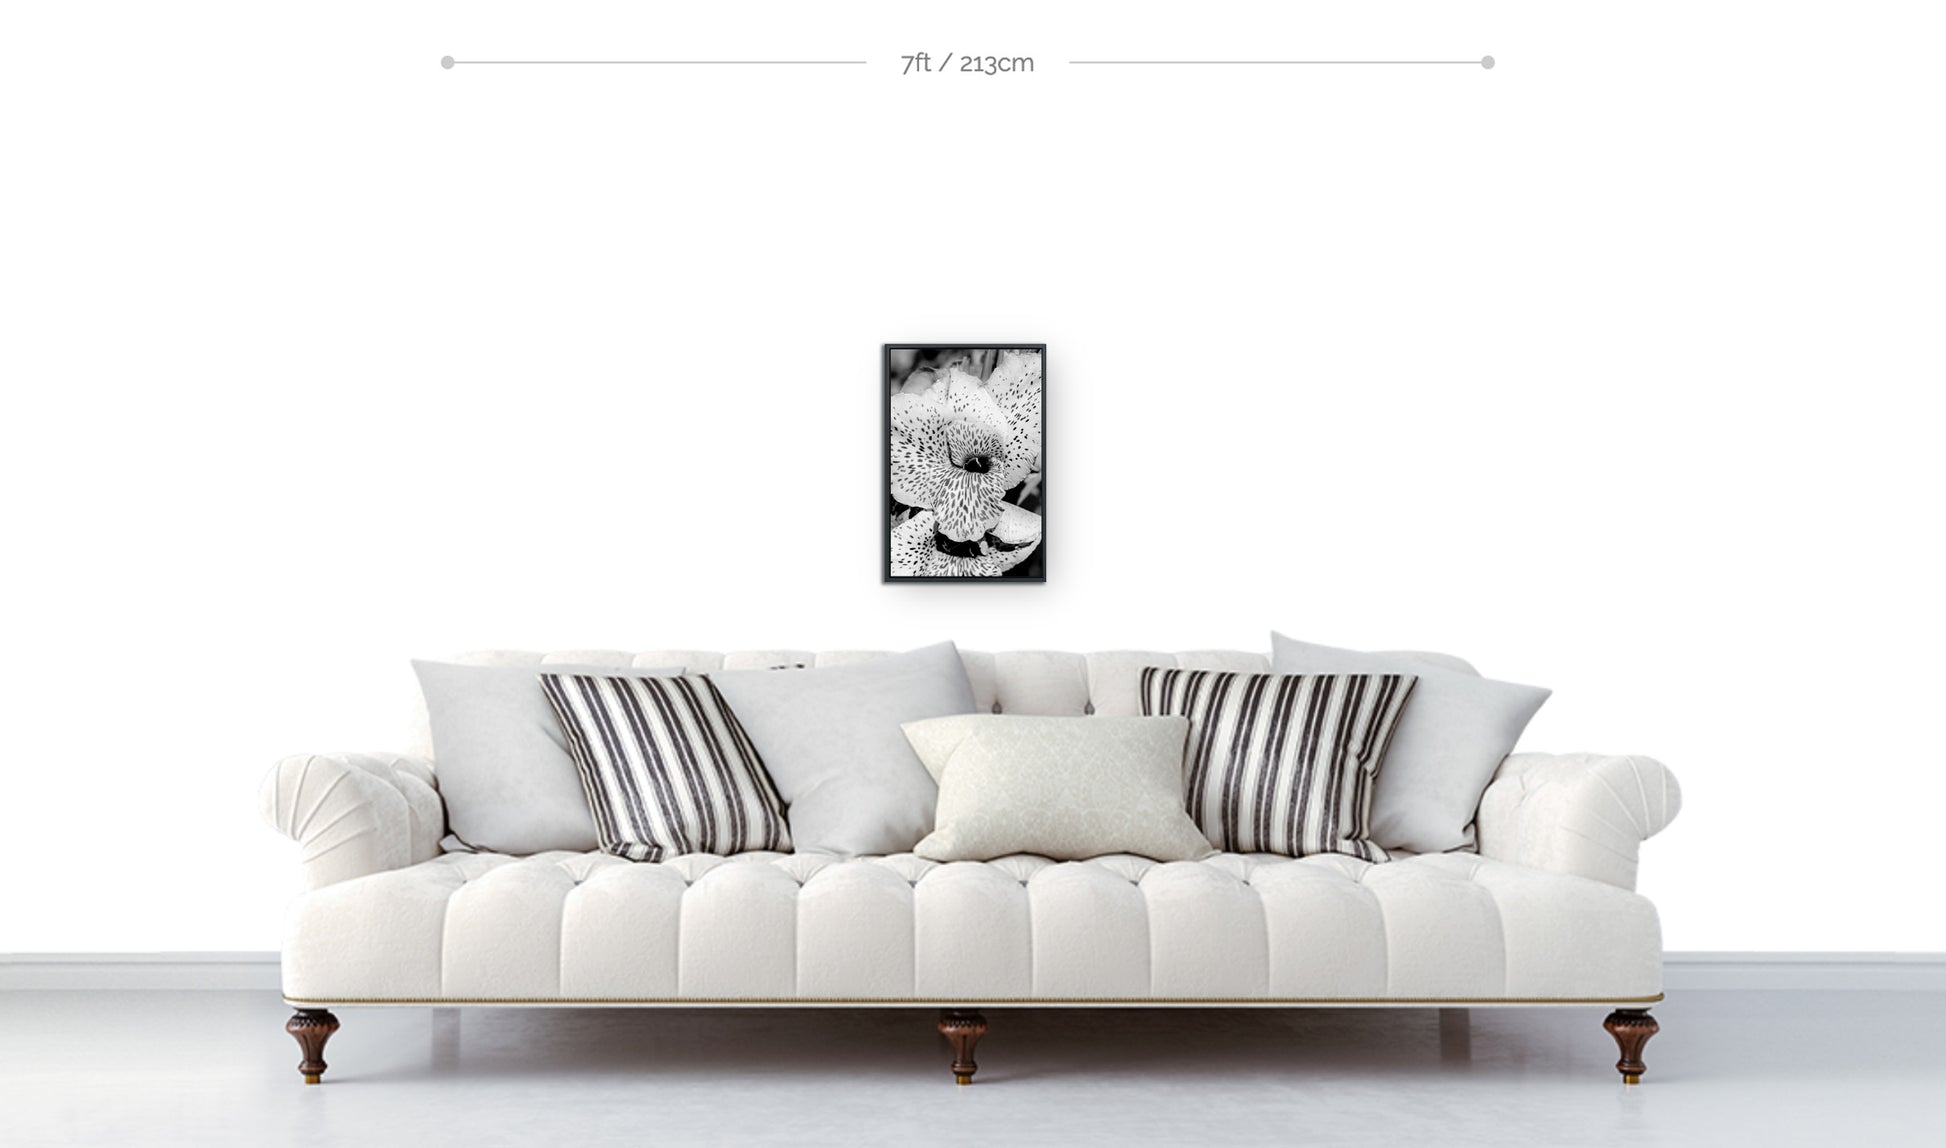 Floral wall decor example framed black and white spotted lily flower print shown hanging above sofa 18x12 size